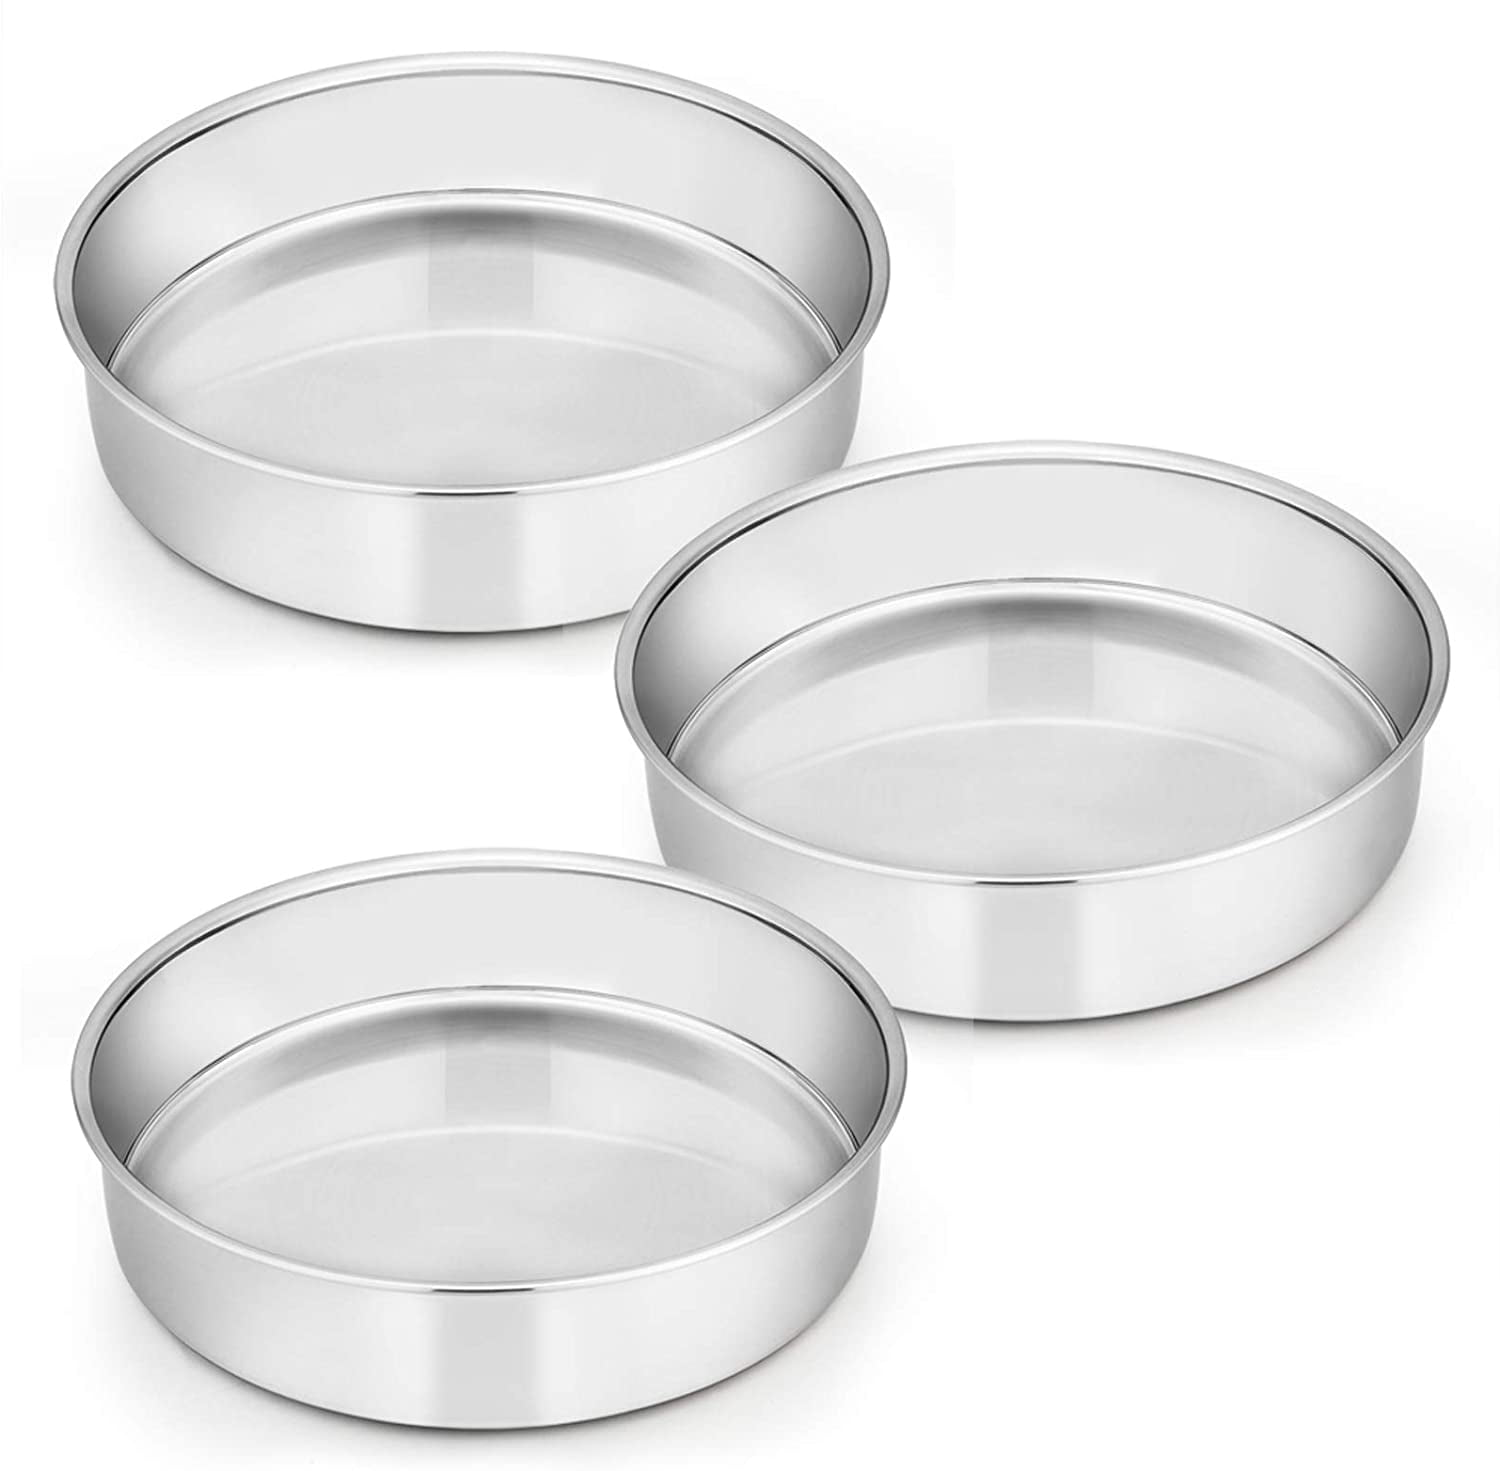 Healthy & Heavy Duty Stainless Steel Tiers Round Baking Cake Pans with Lids Set of 4 2 Pans + 2 Lids Dishwasher Safe & Easy Clean TeamFar 8 Inch Cake Pan Mirror Polish & Smooth Edge 